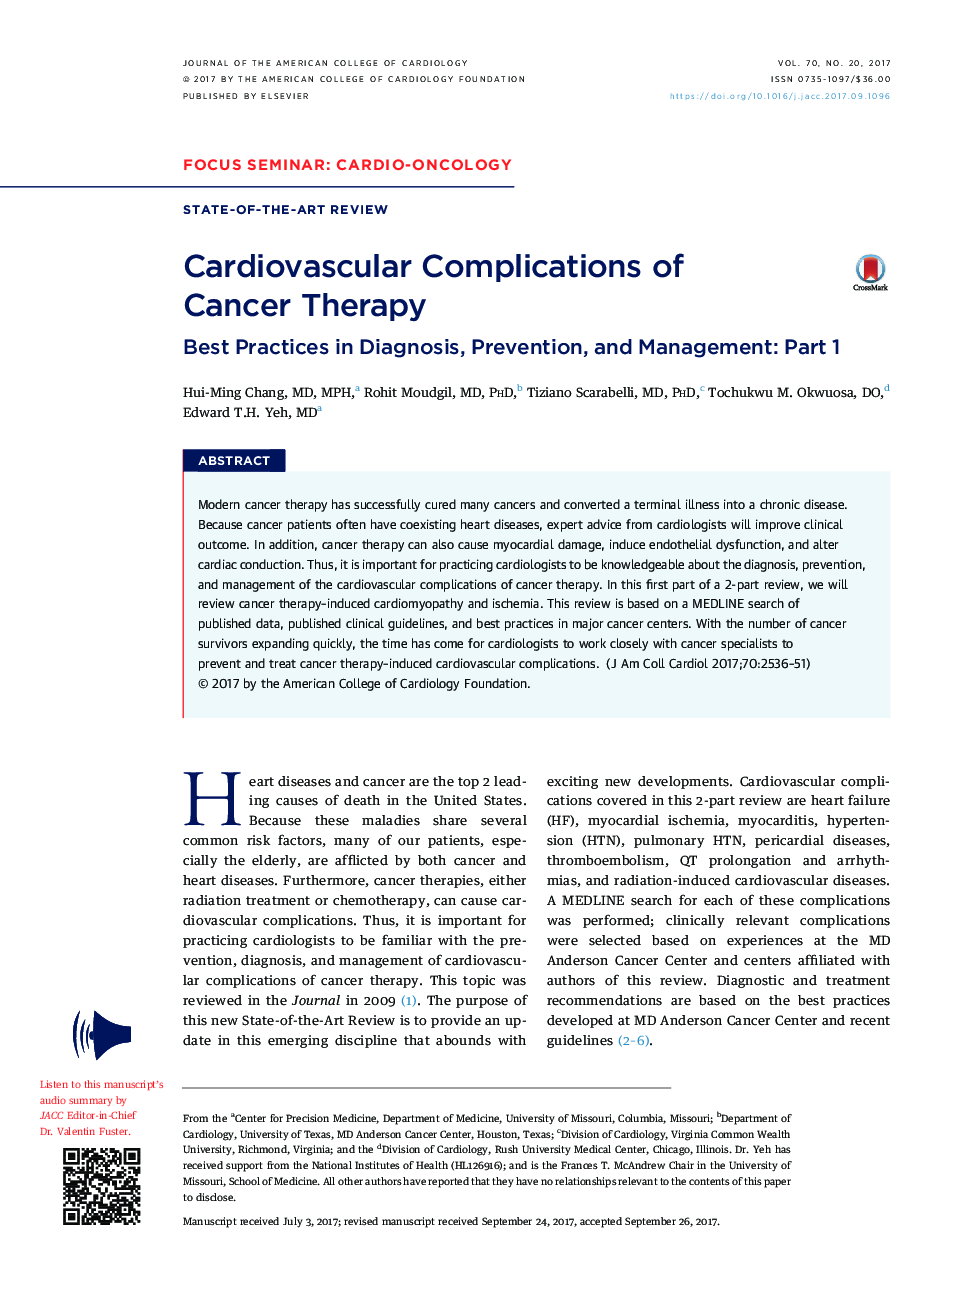 Cardiovascular Complications of CancerÂ Therapy